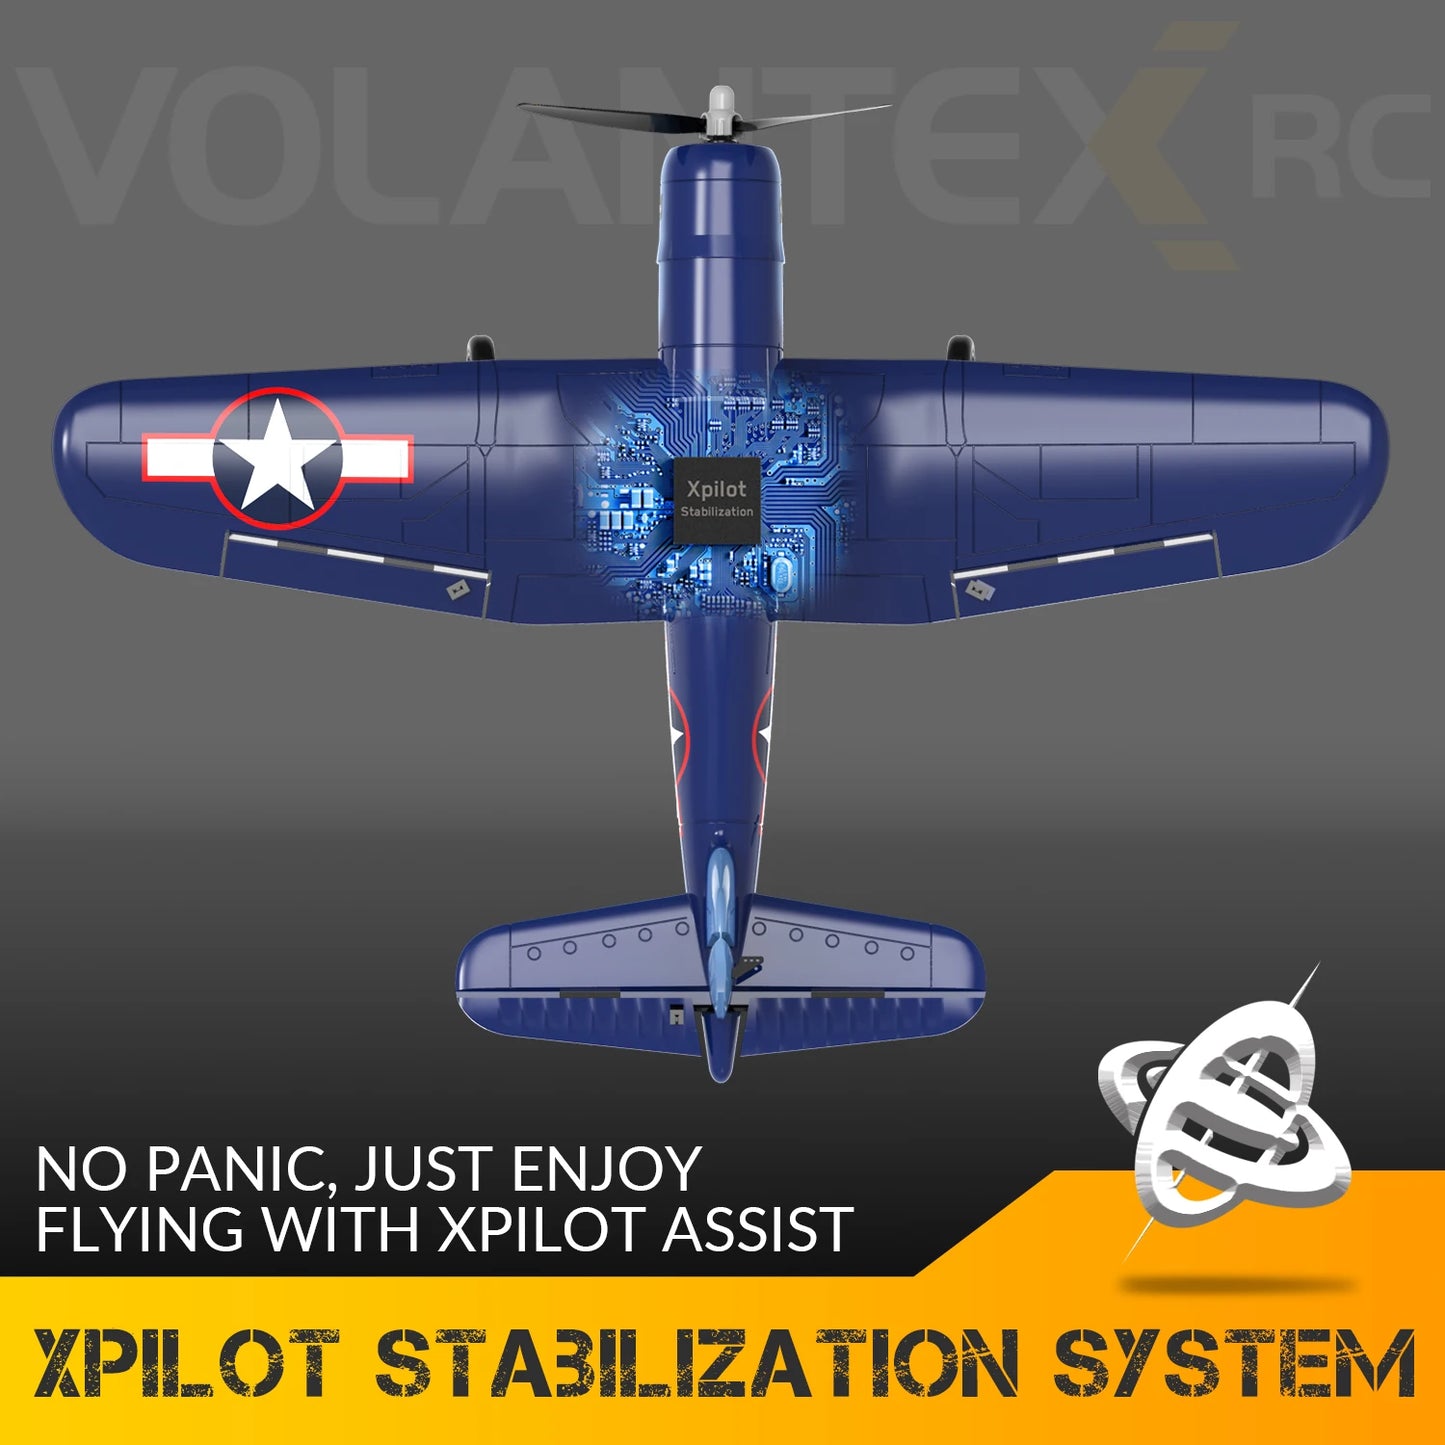 Ultimate F4U Corsair Remote Control Plane - High Performance Outdoor Aircraft for Kids